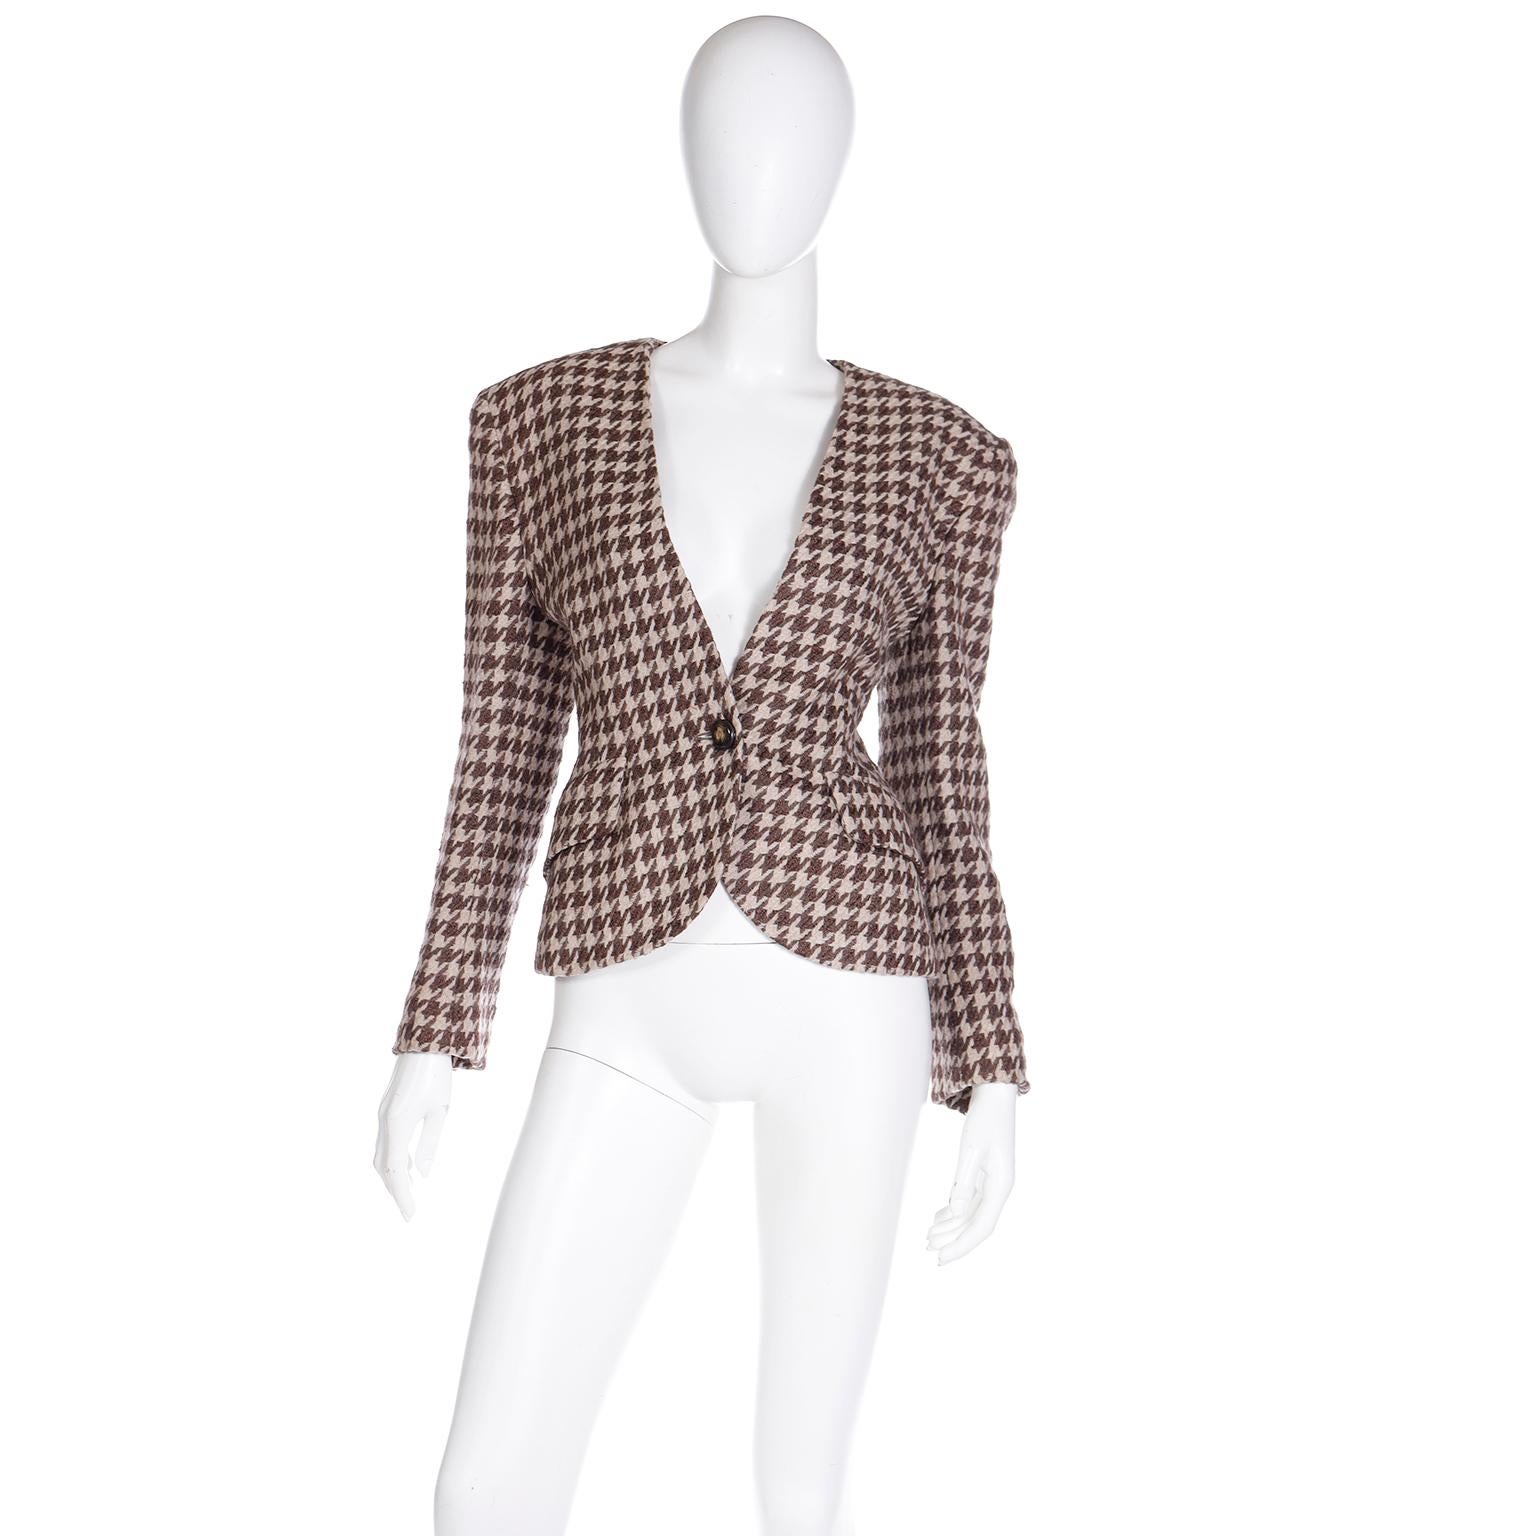 This fun vintage 1980's Christian Dior brown and ivory houndstooth check jacket has a flattering silhouette with a fitted waist and slightly cropped length. This wool jacket is fully lined and has a glossy wood grain button for closure at the waist.